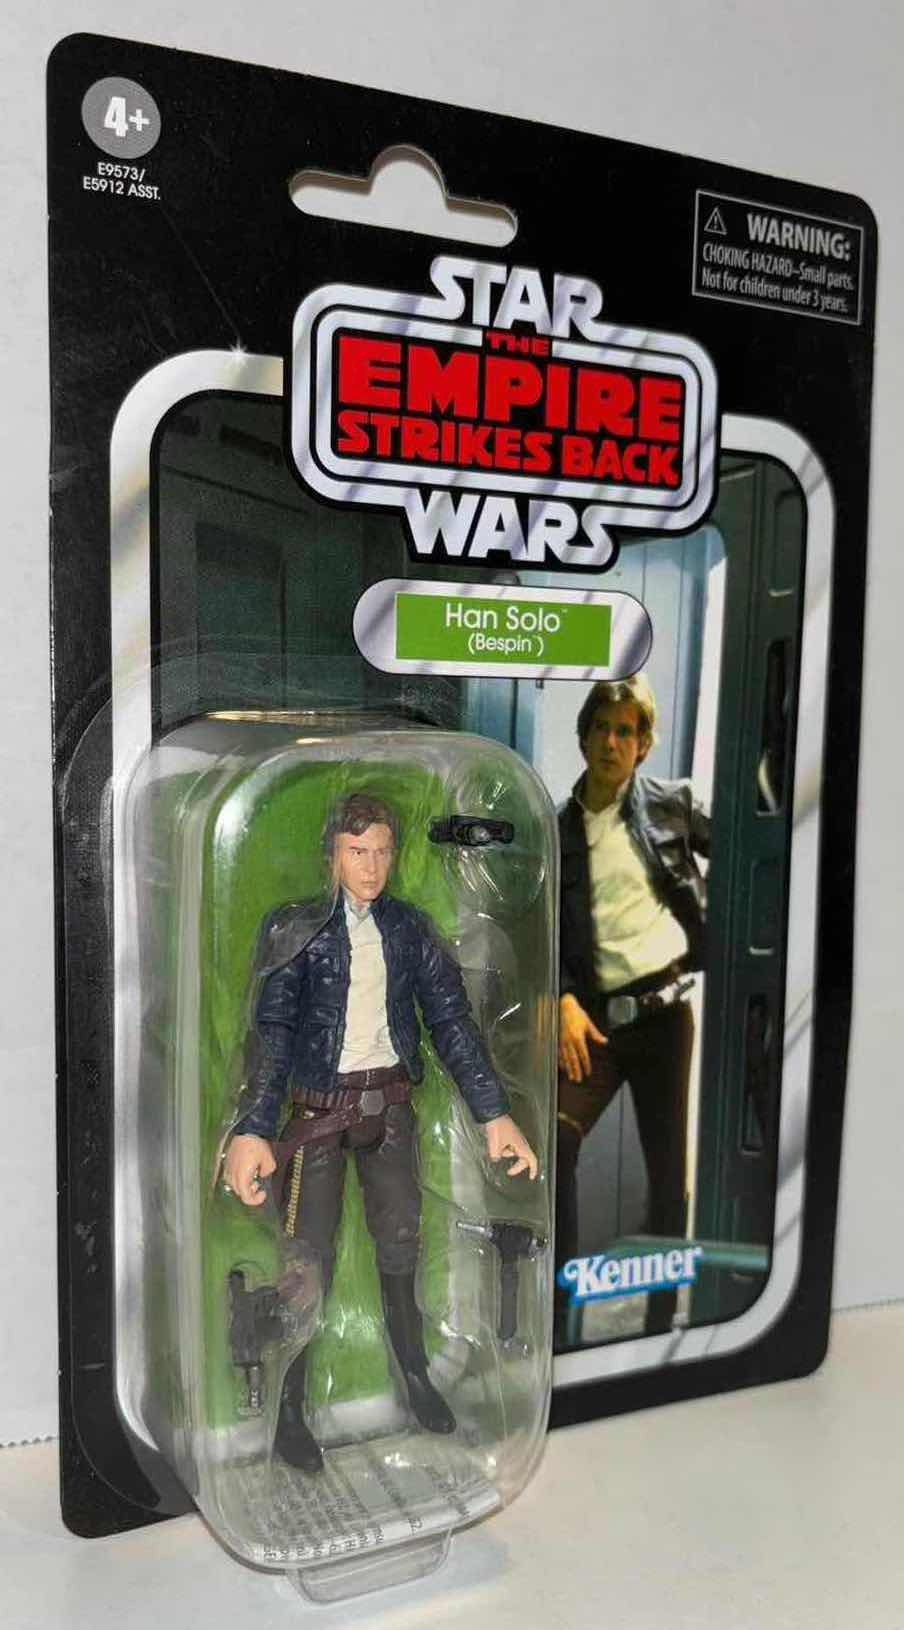 Photo 1 of NEW STAR WARS THE EMPIRE STRIKES BACK 3.75” THE VINTAGE COLLECTION ACTION FIGURE & ACCESSORIES, “HAN SOLO (BESPIN)” (1)